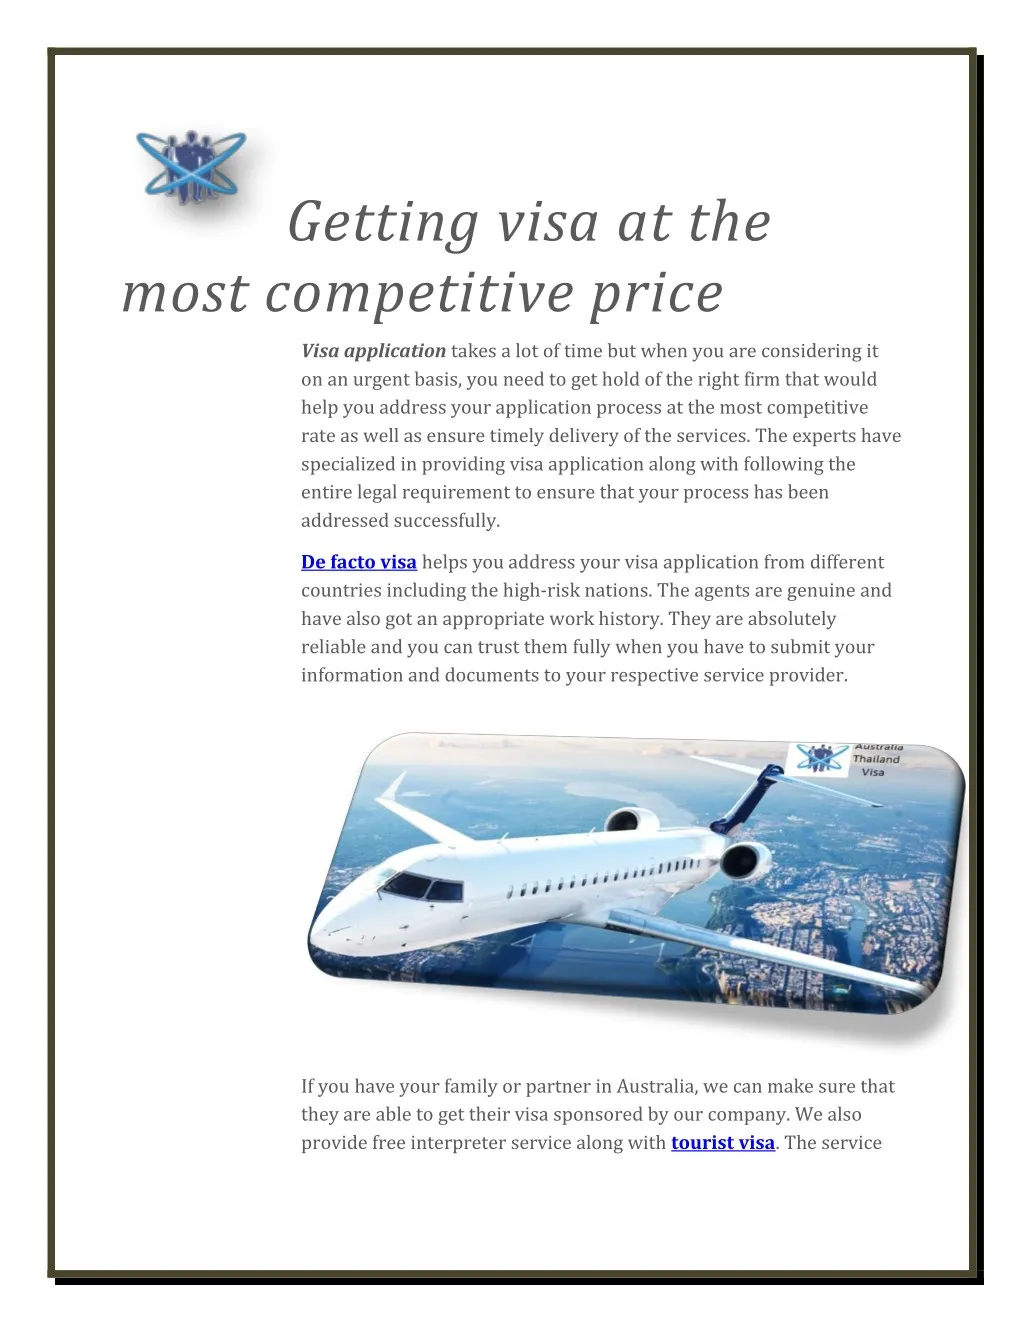 getting visa at the most competitive price